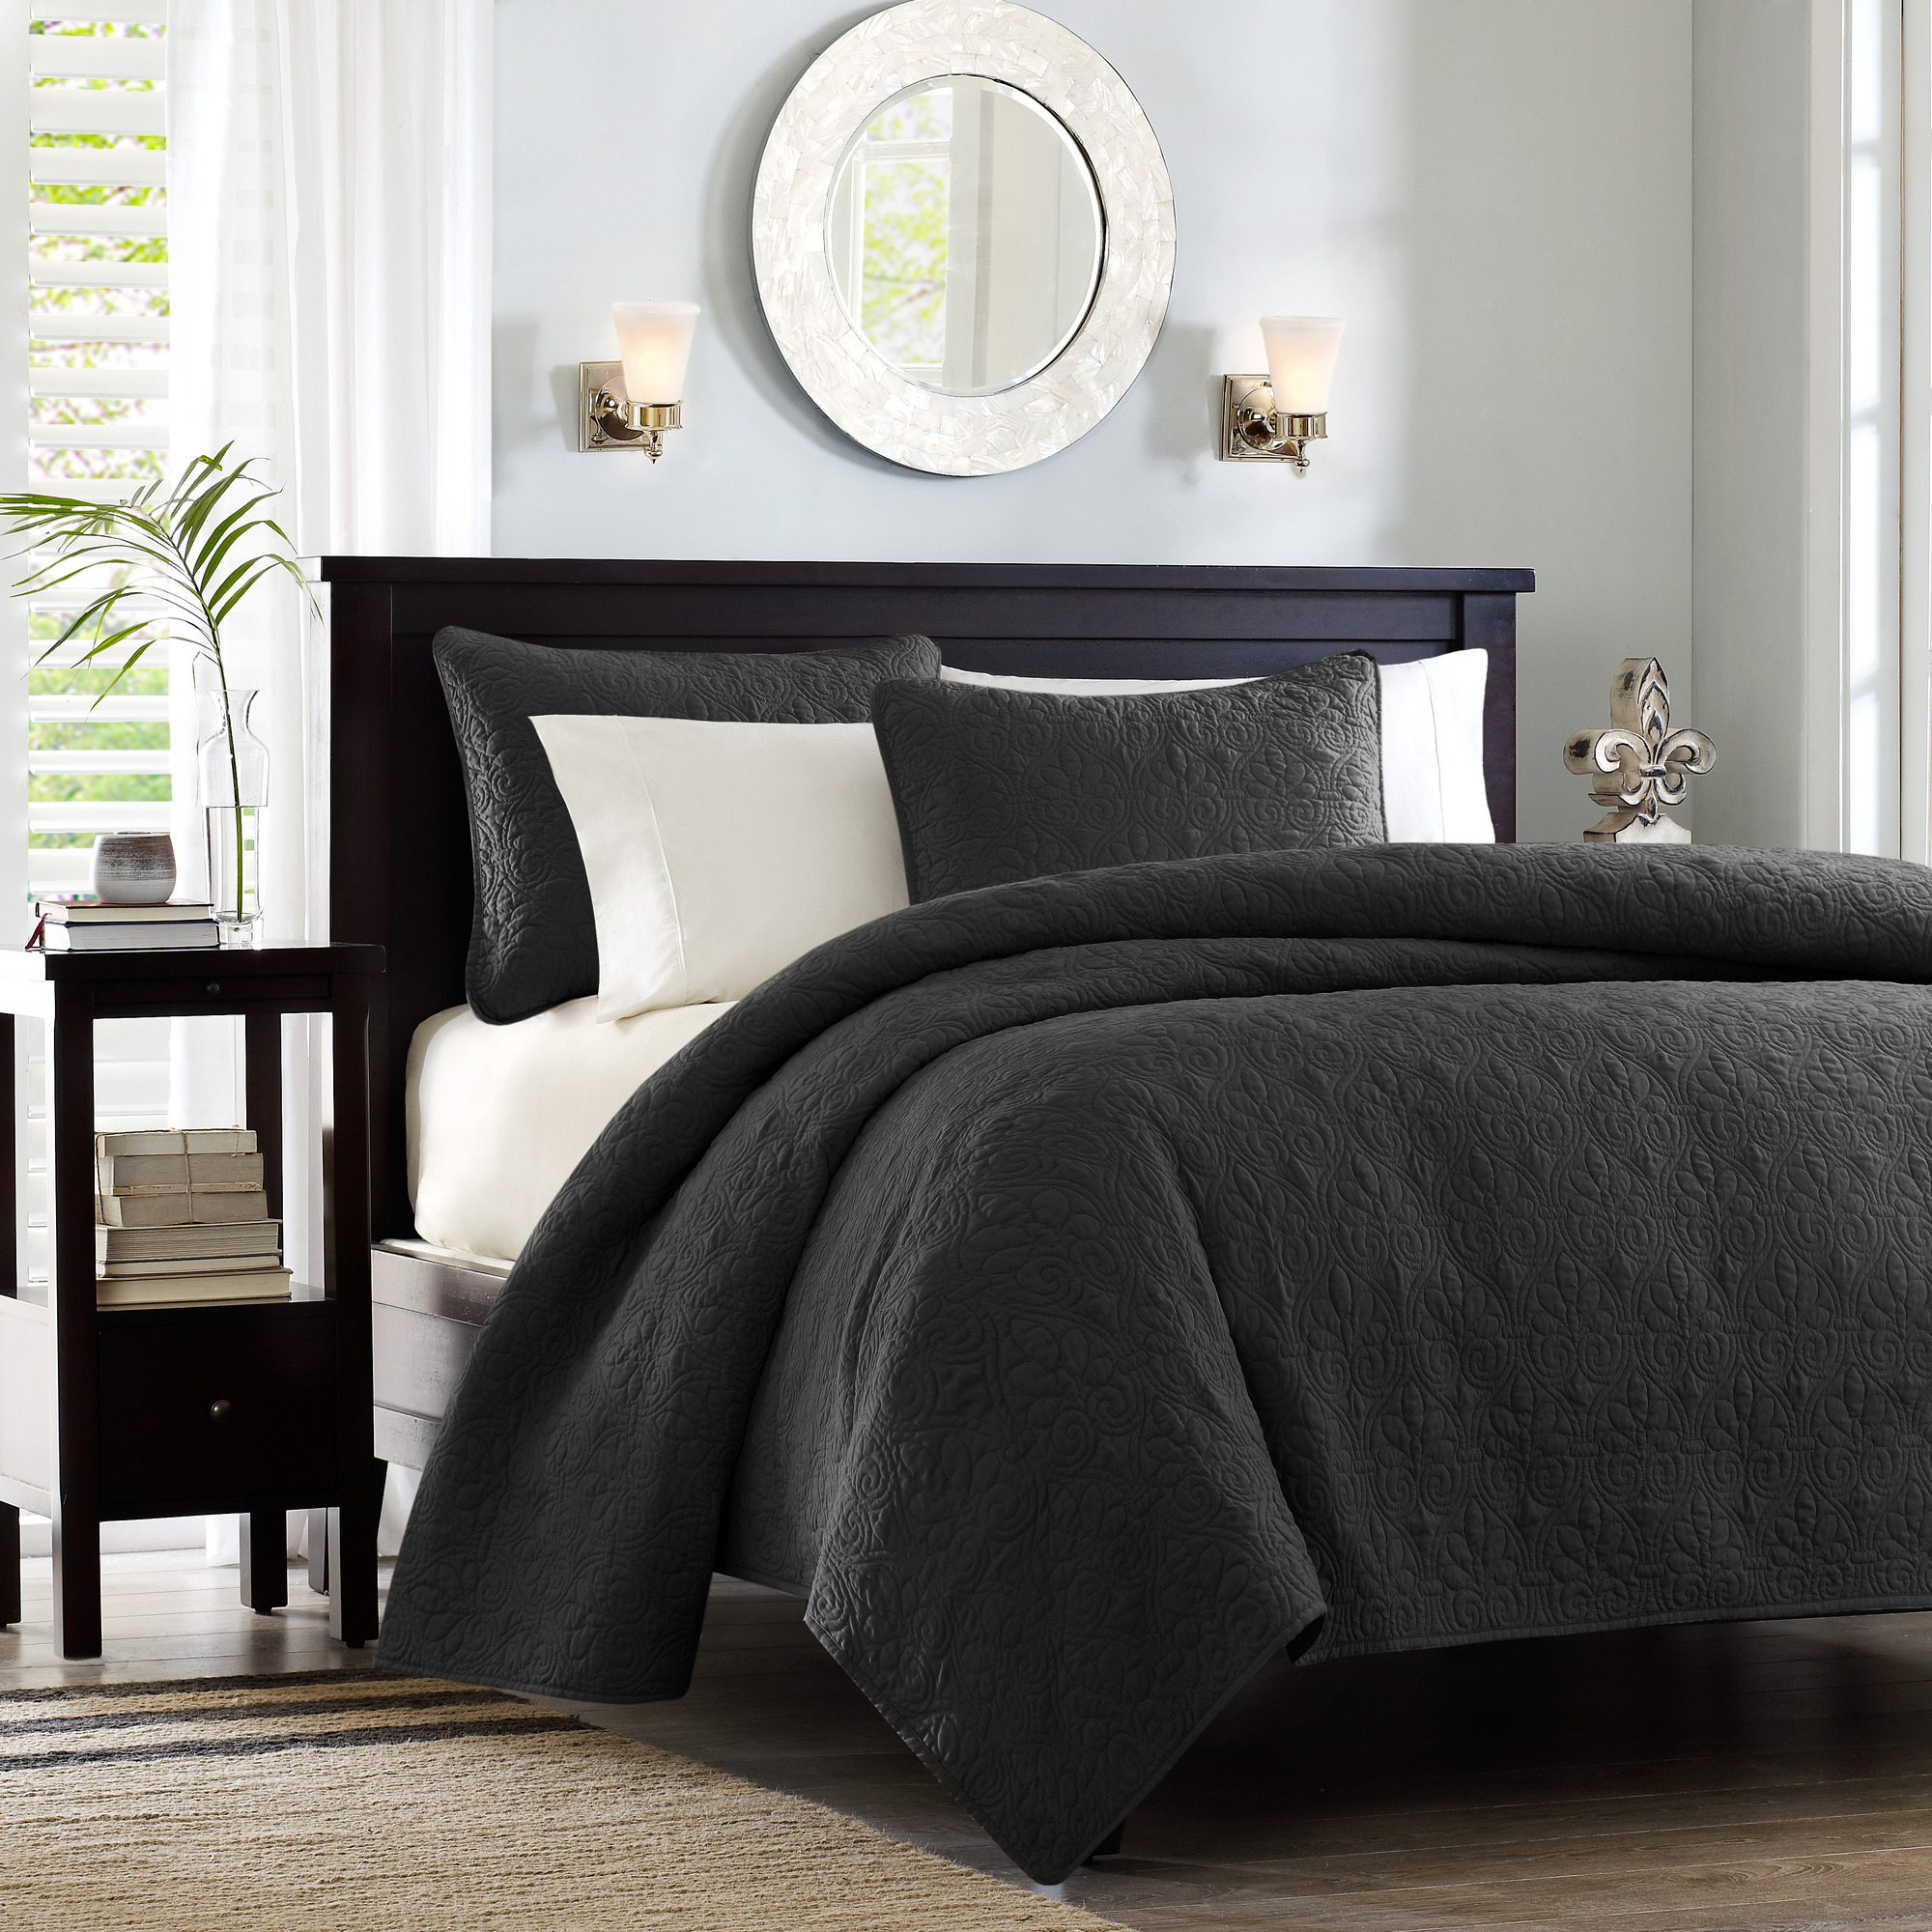 Home Essence Vancouver Super Soft Reversible Coverlet Set, Black, Full/Queen - image 1 of 10